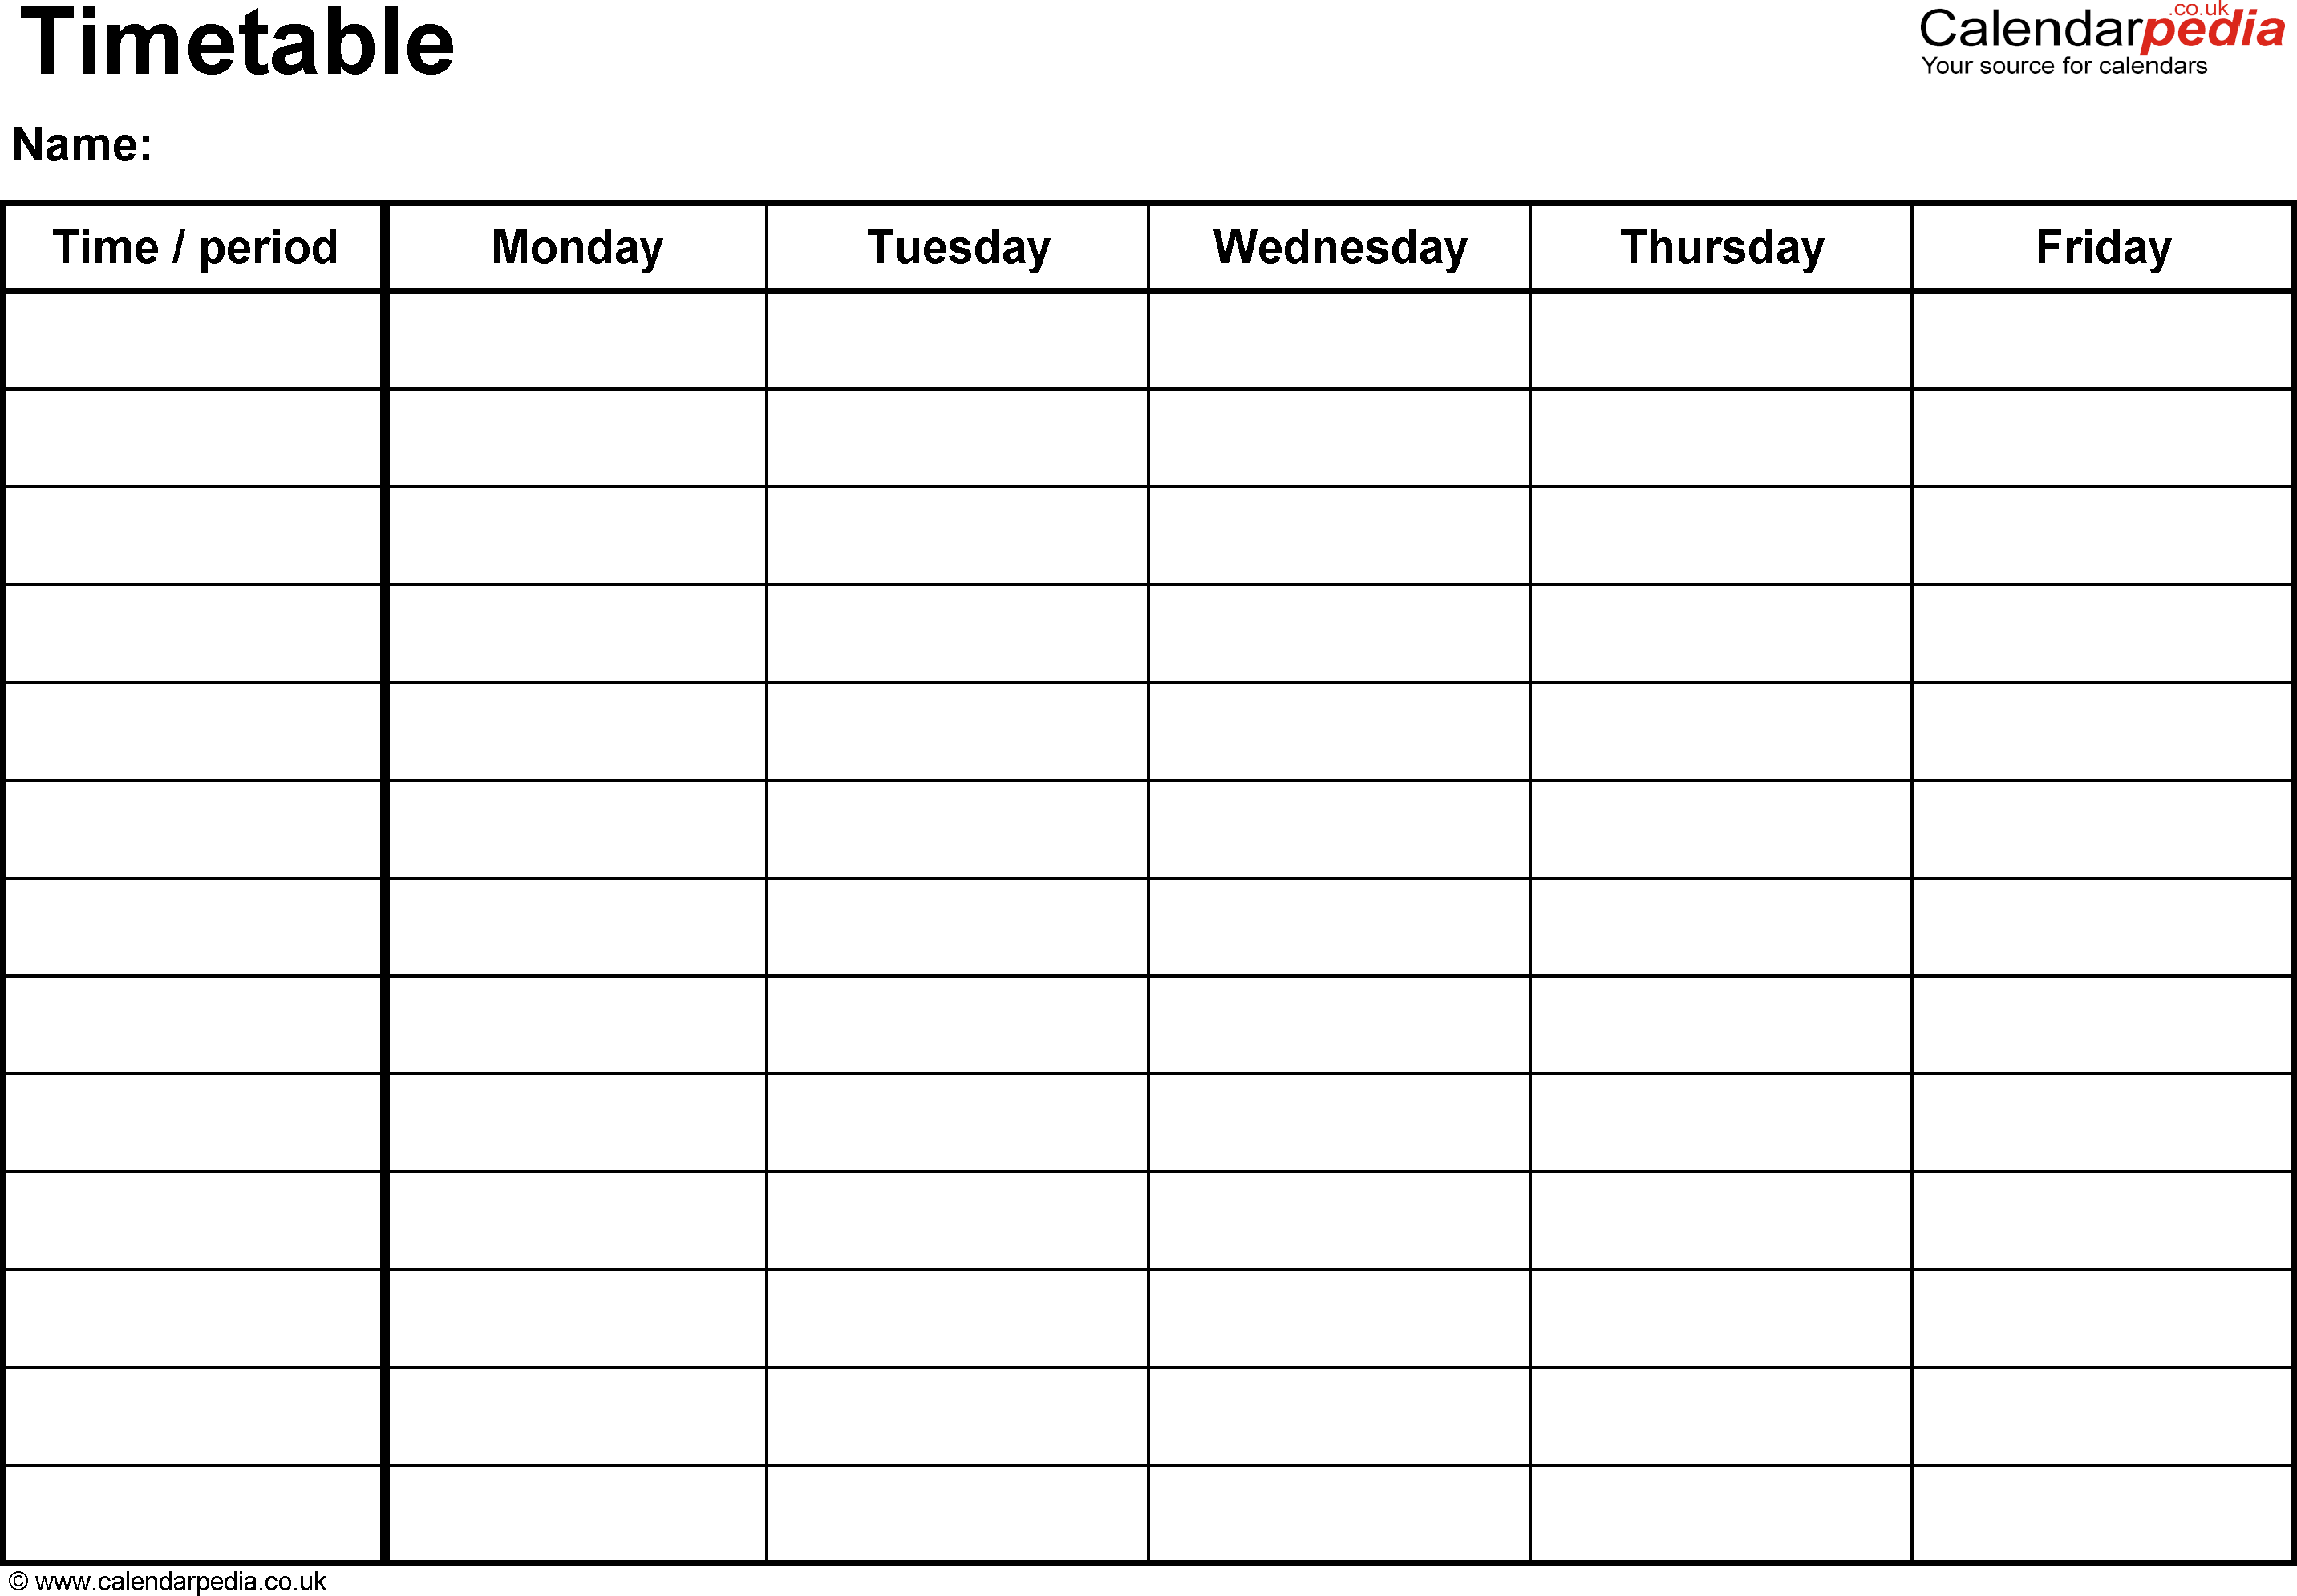 Monday Friday Schedule Template Image